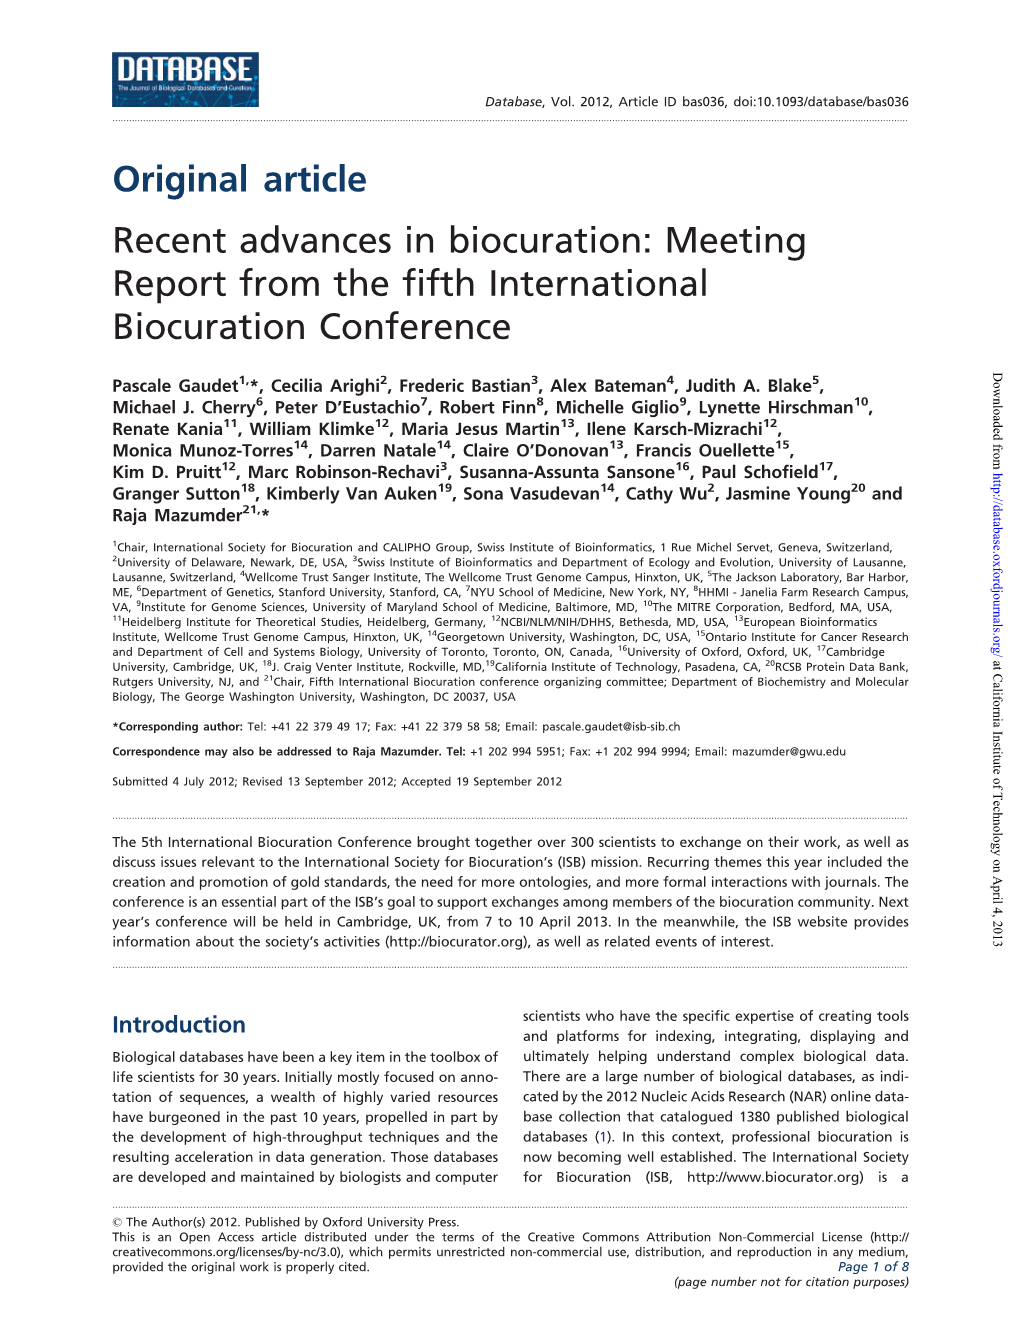 Meeting Report from the Fifth International Biocuration Conference Downloaded from Pascale Gaudet1,*, Cecilia Arighi2, Frederic Bastian3, Alex Bateman4, Judith A